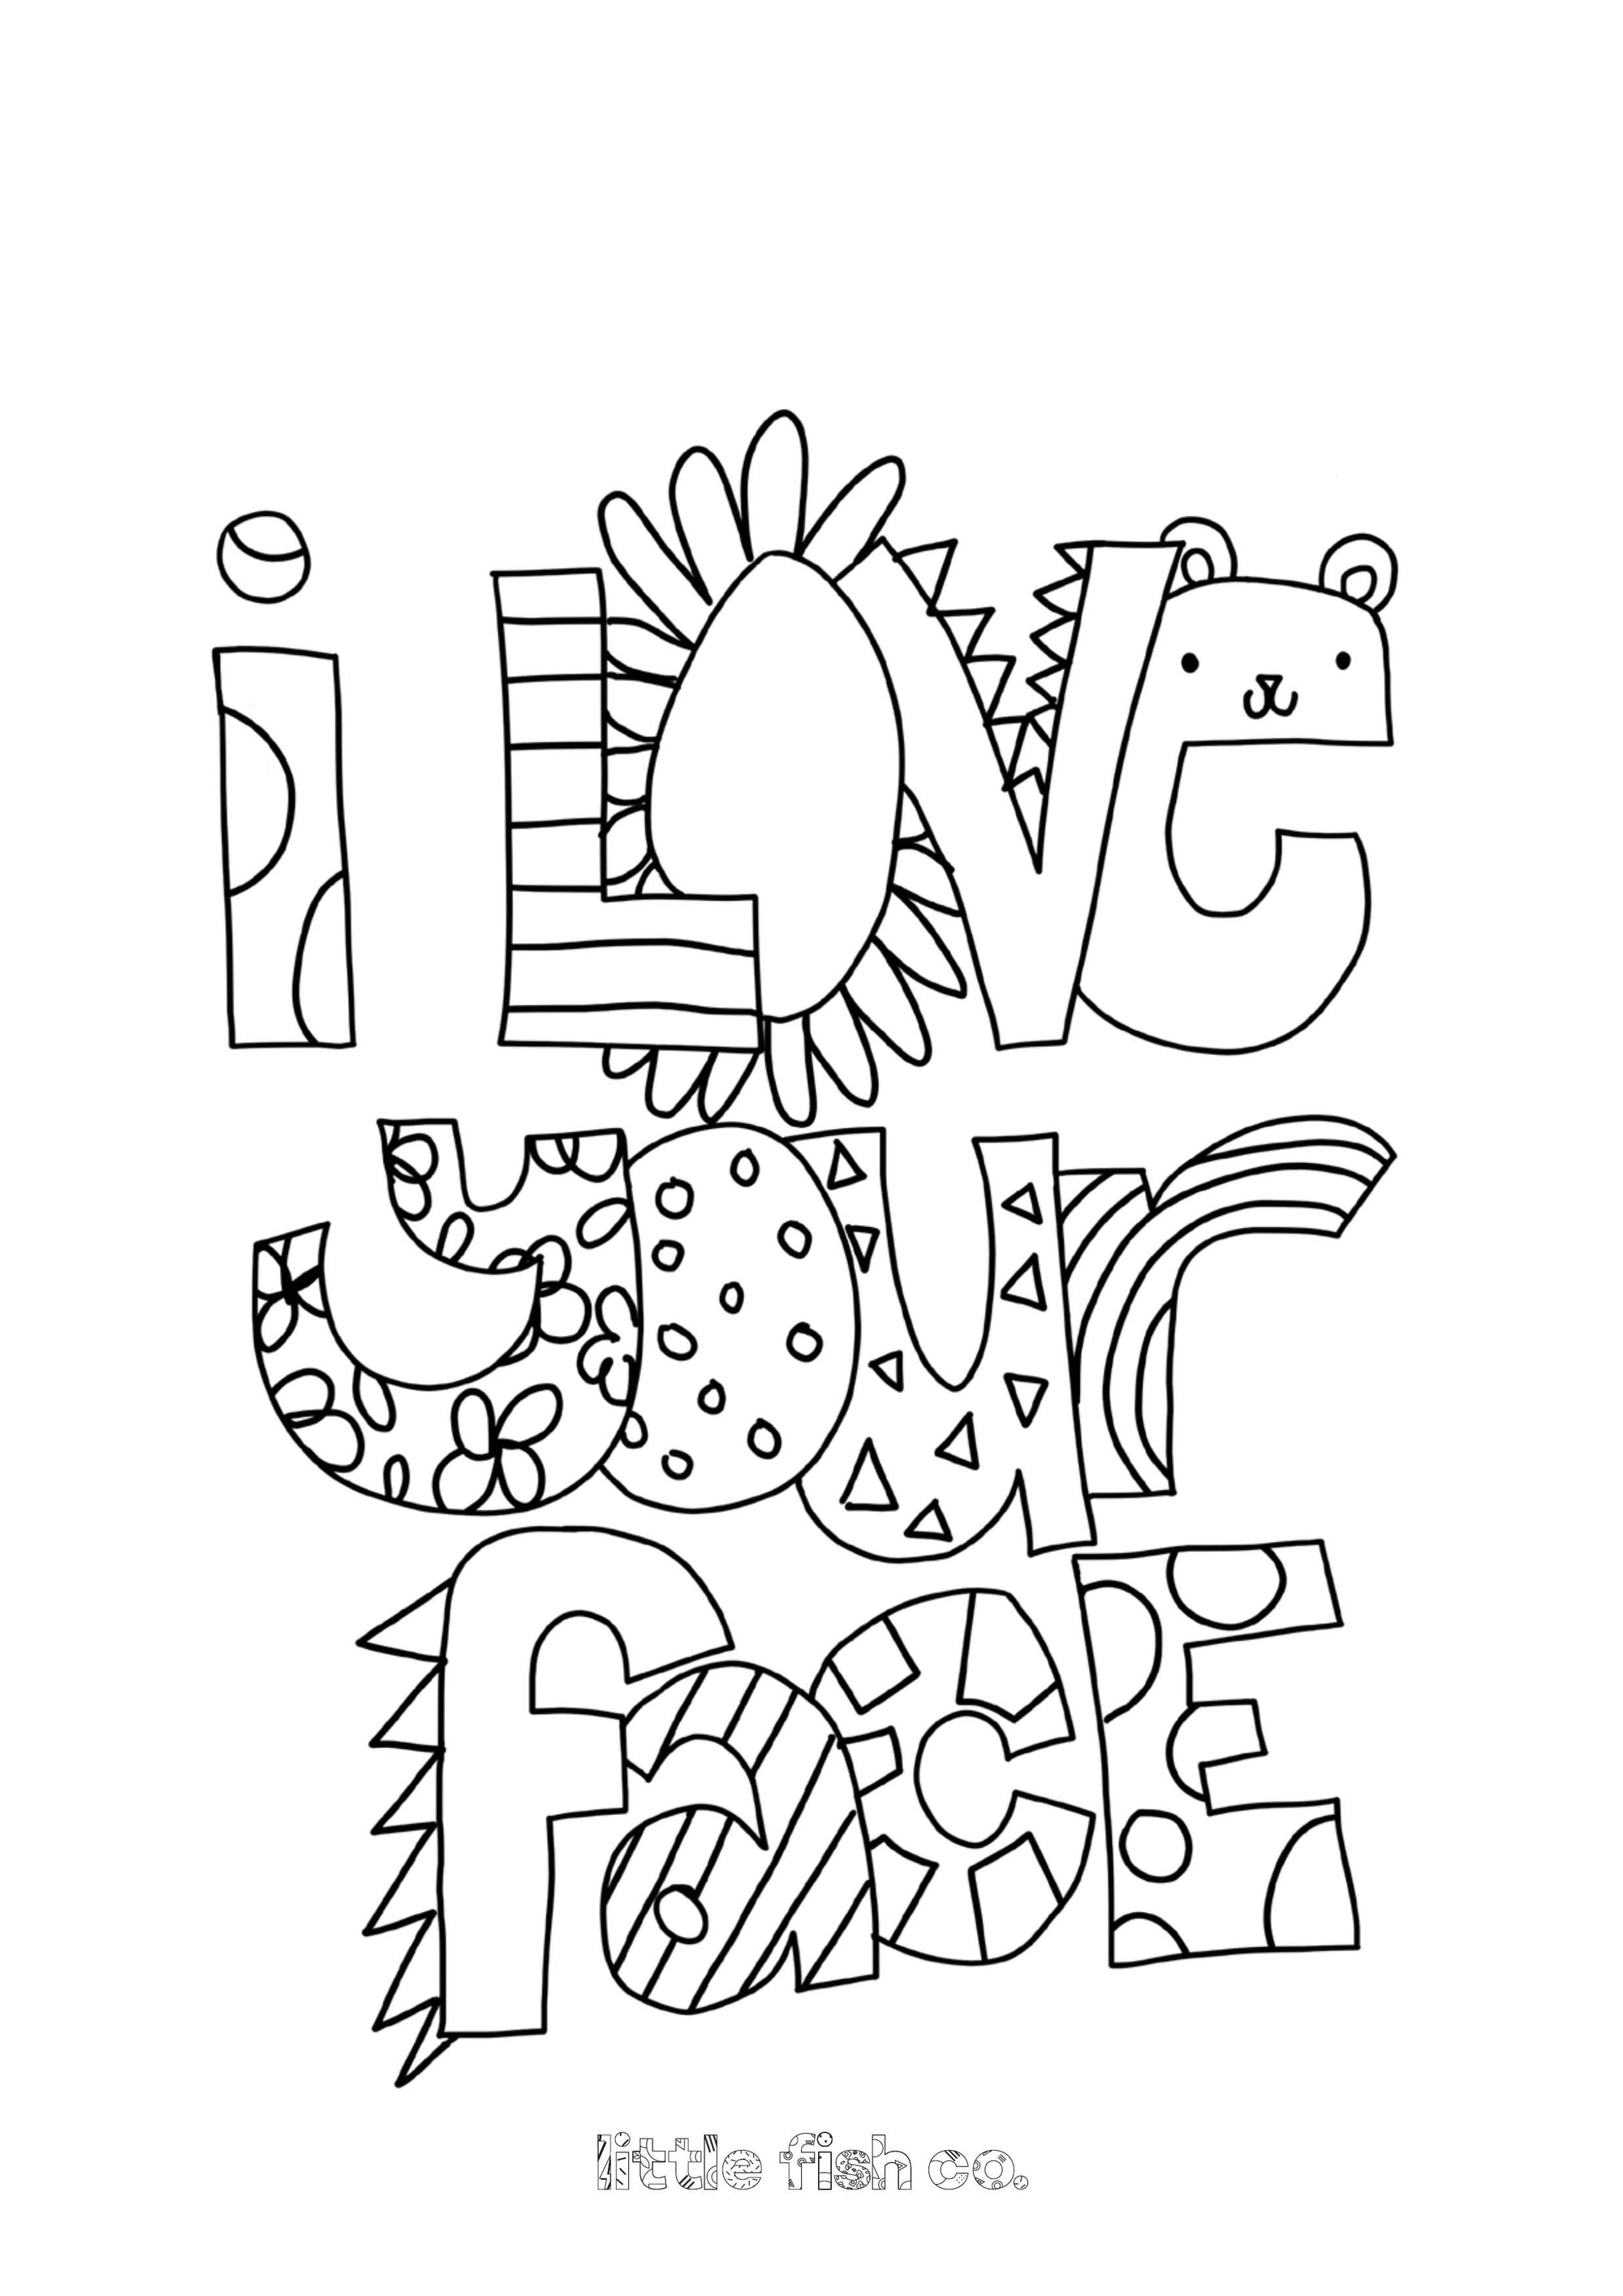 I love you face - colouring in sheet-Little Fish Co.